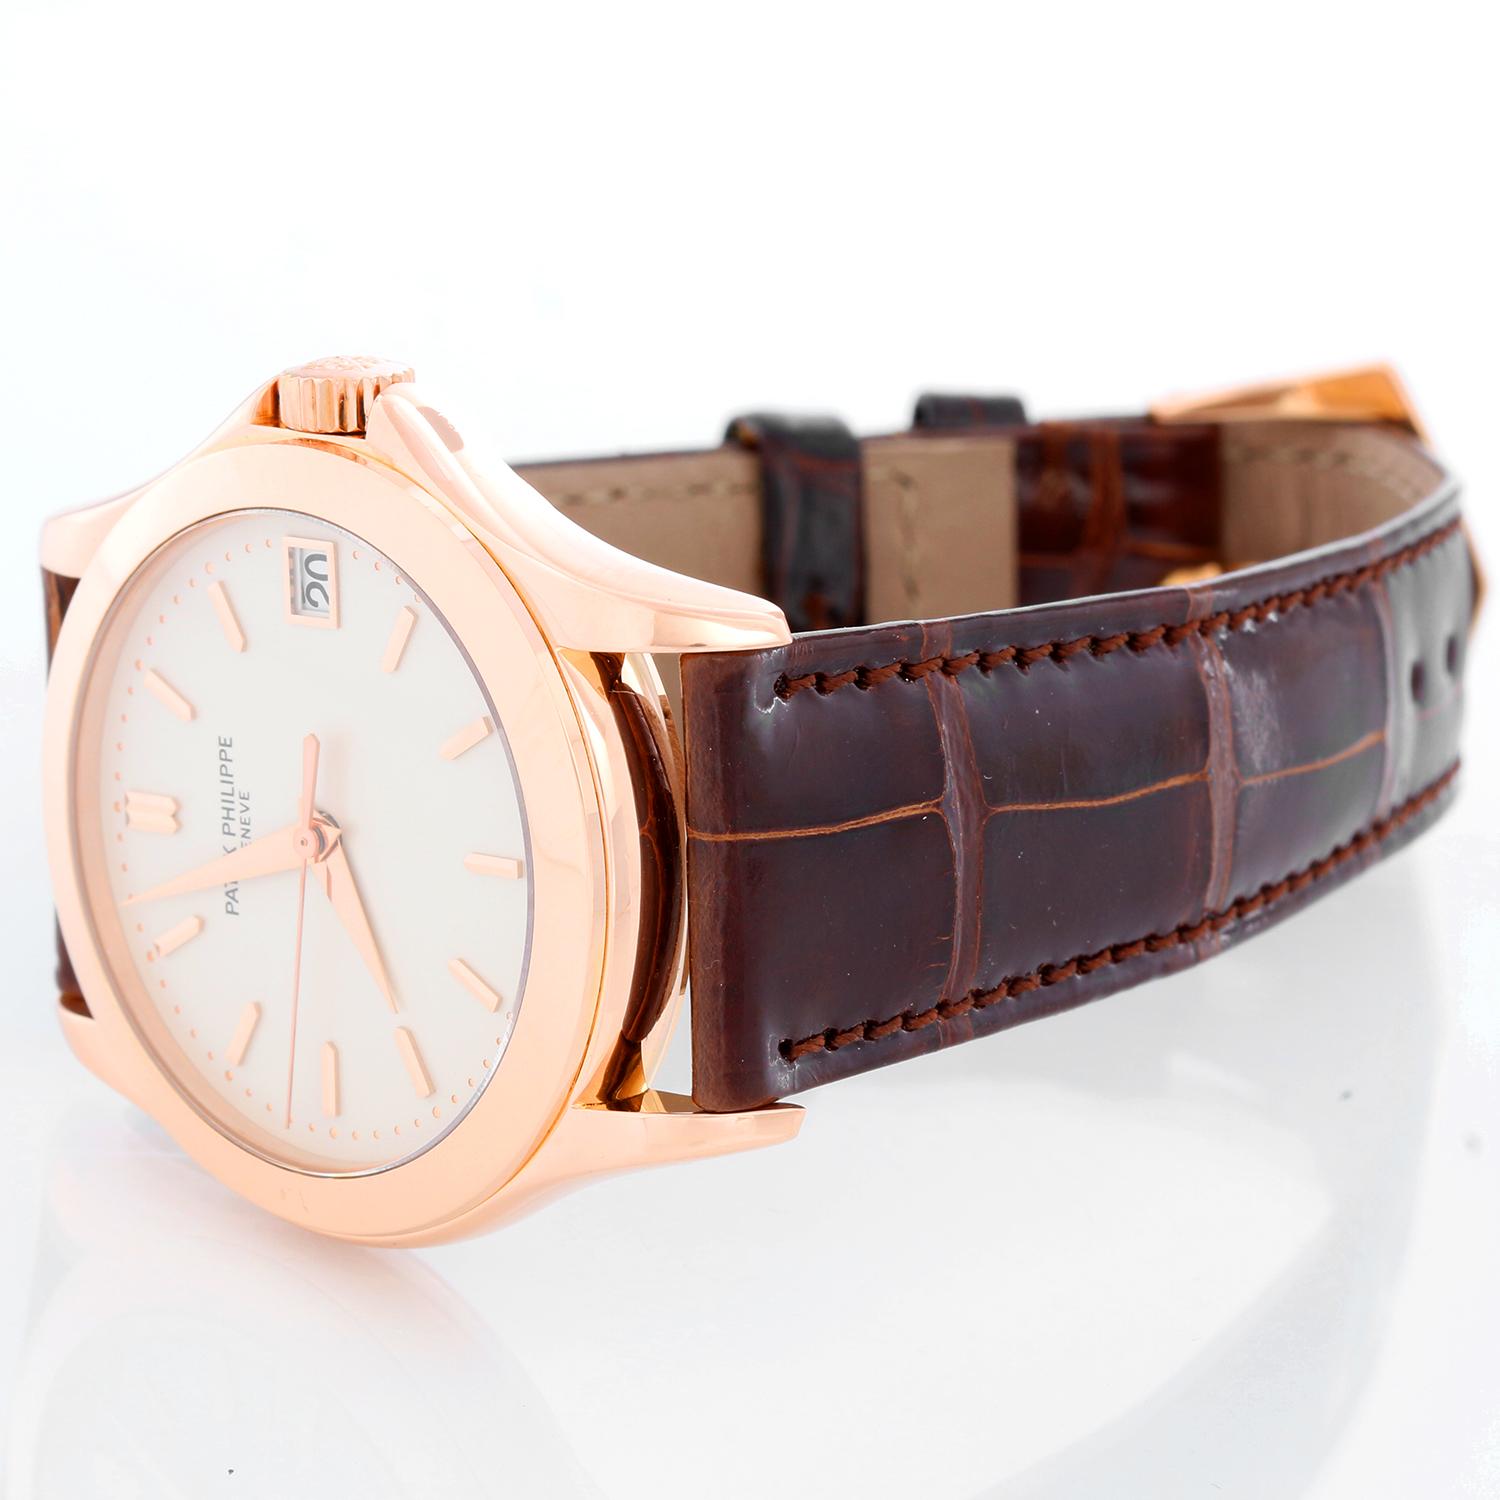 Patek Philippe  Calatrava Men's 18k Rose Gold Watch 315/190 - Automatic winding. 18k Rose gold case with exposition back (37mm diameter). Ivory colored dial with gold stick markers; date at 3 o'clock. Brown alligator strap with tang buckle .